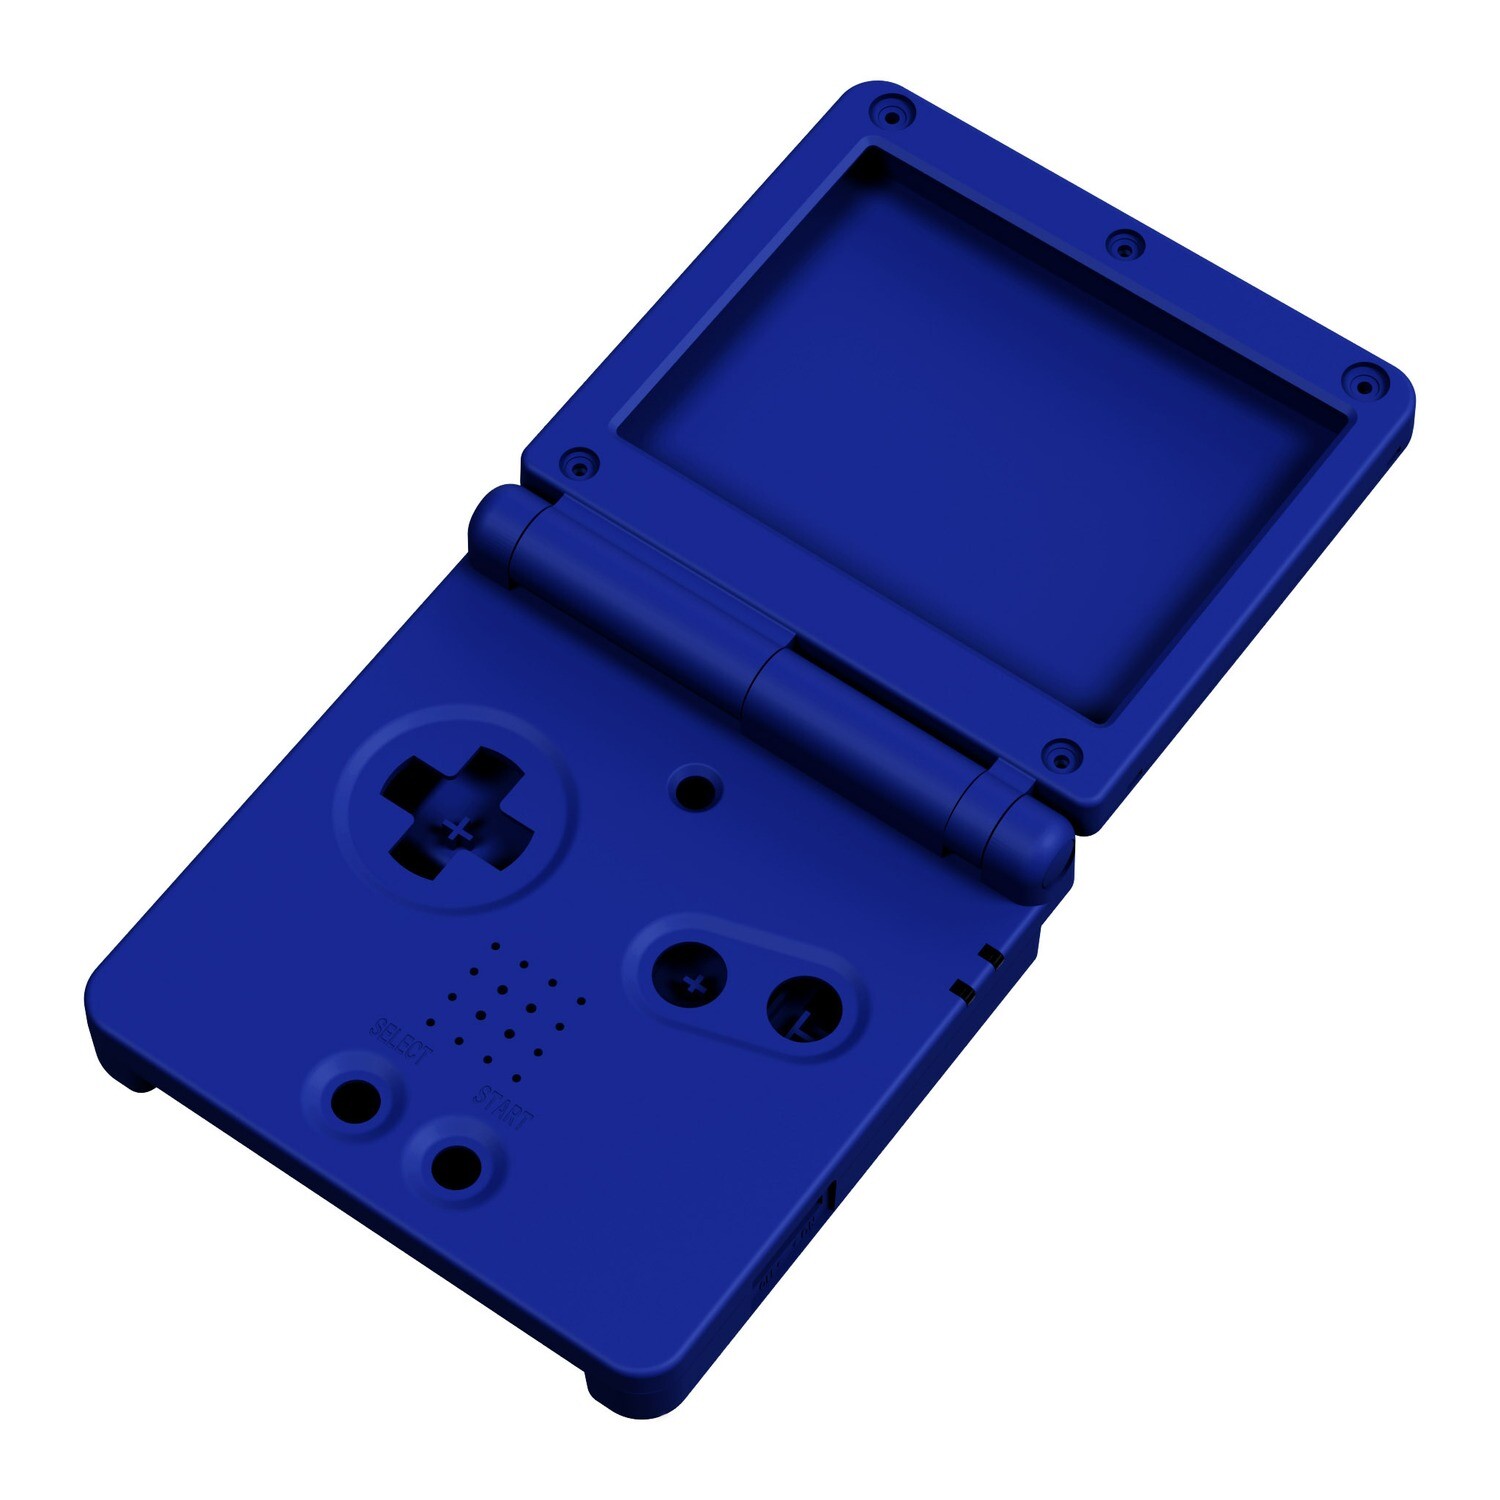 Game Boy Advance SP Shell (Solid Blue)